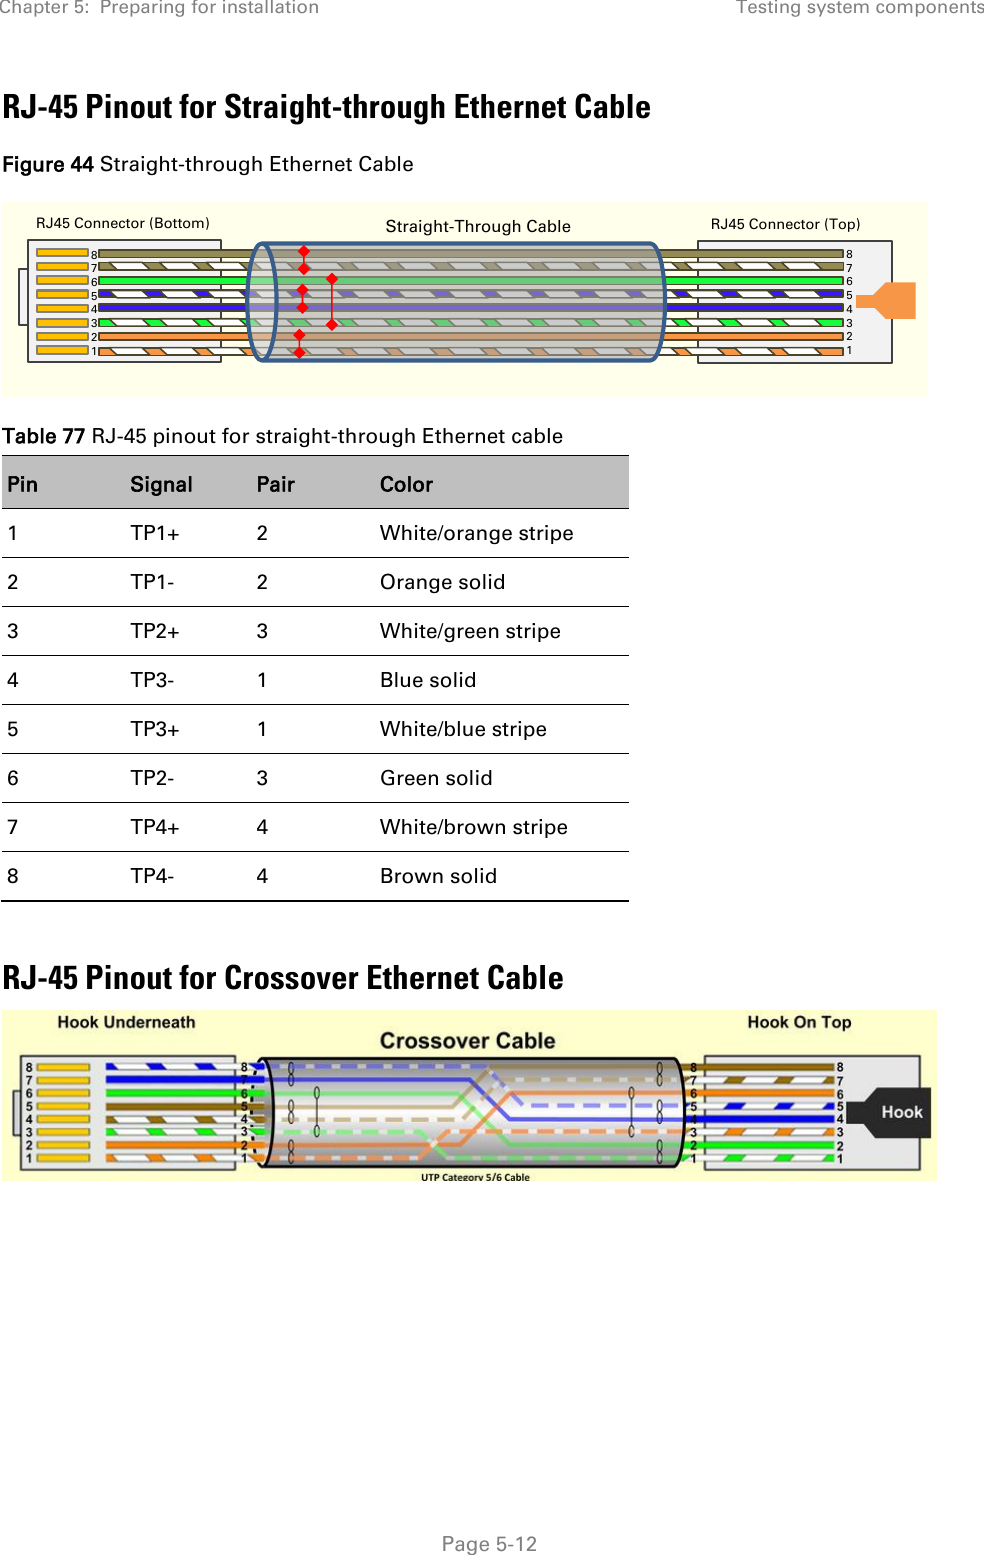 Chapter 5:  Preparing for installation Testing system components   Page 5-12 RJ-45 Pinout for Straight-through Ethernet Cable Figure 44 Straight-through Ethernet Cable  Table 77 RJ-45 pinout for straight-through Ethernet cable Pin Signal Pair Color 1 TP1+ 2 White/orange stripe 2 TP1- 2 Orange solid 3 TP2+ 3 White/green stripe 4 TP3- 1 Blue solid 5 TP3+ 1 White/blue stripe 6 TP2- 3 Green solid 7 TP4+ 4 White/brown stripe 8 TP4- 4 Brown solid  RJ-45 Pinout for Crossover Ethernet Cable    `` RJ45 Connector (Bottom) Straight-Through Cable  RJ45 Connector (Top) 8     7 6 5 4 3 2 1   8     7 6 5 4 3 2 1   